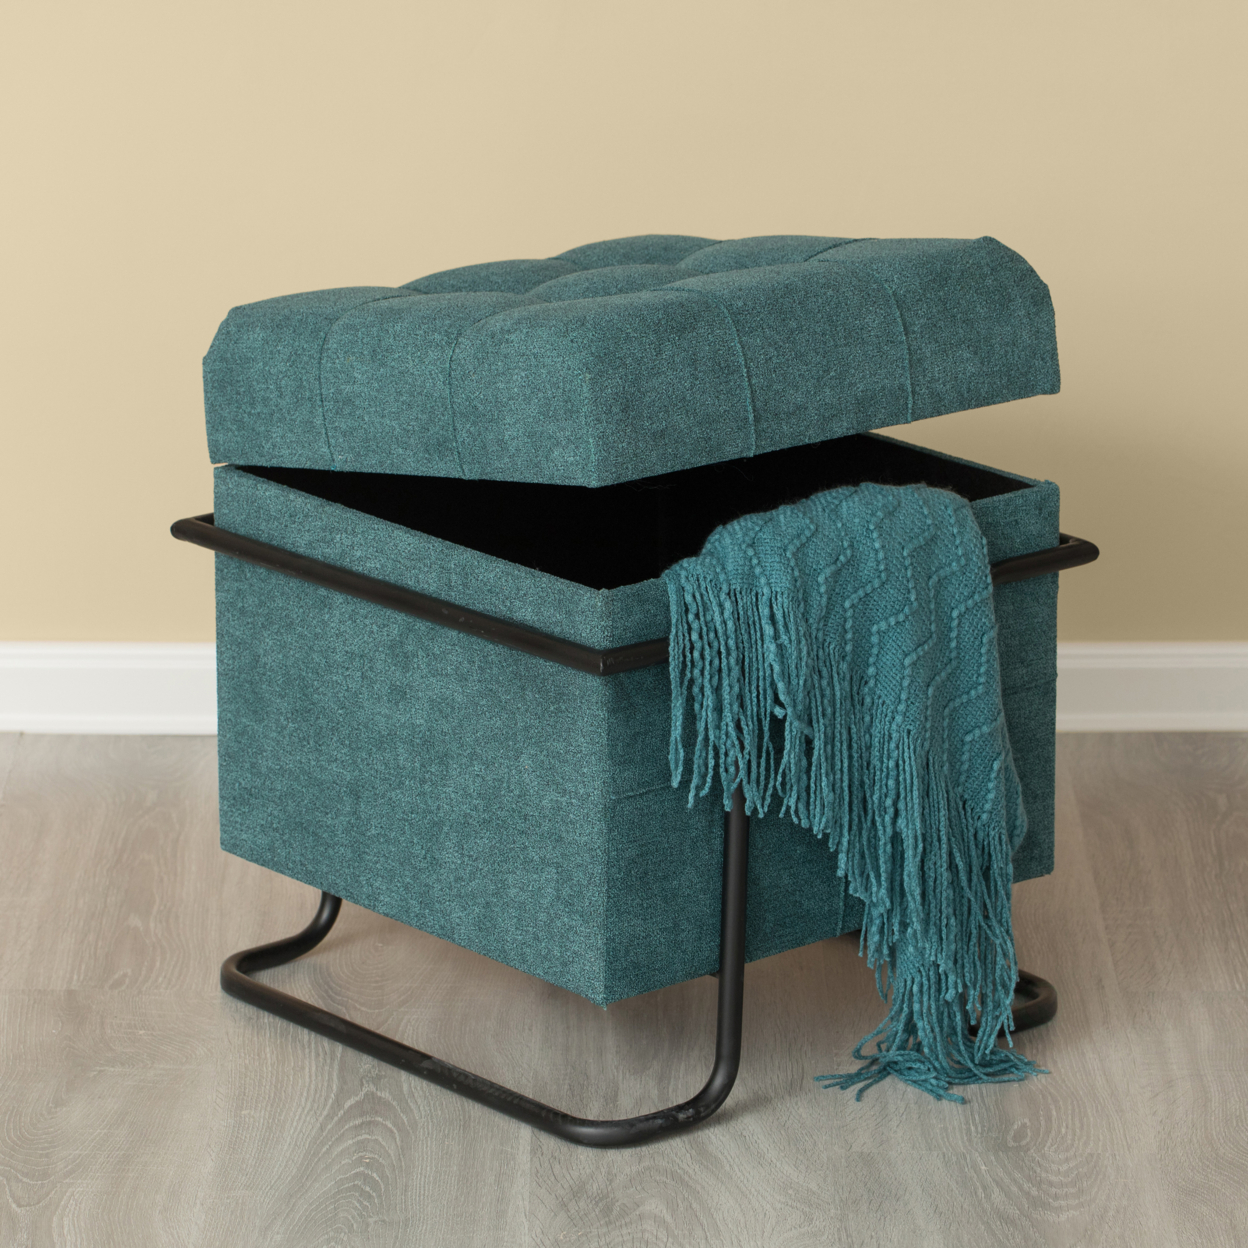 Square Fabric Storage Ottoman With Black Metal Frame - Blue